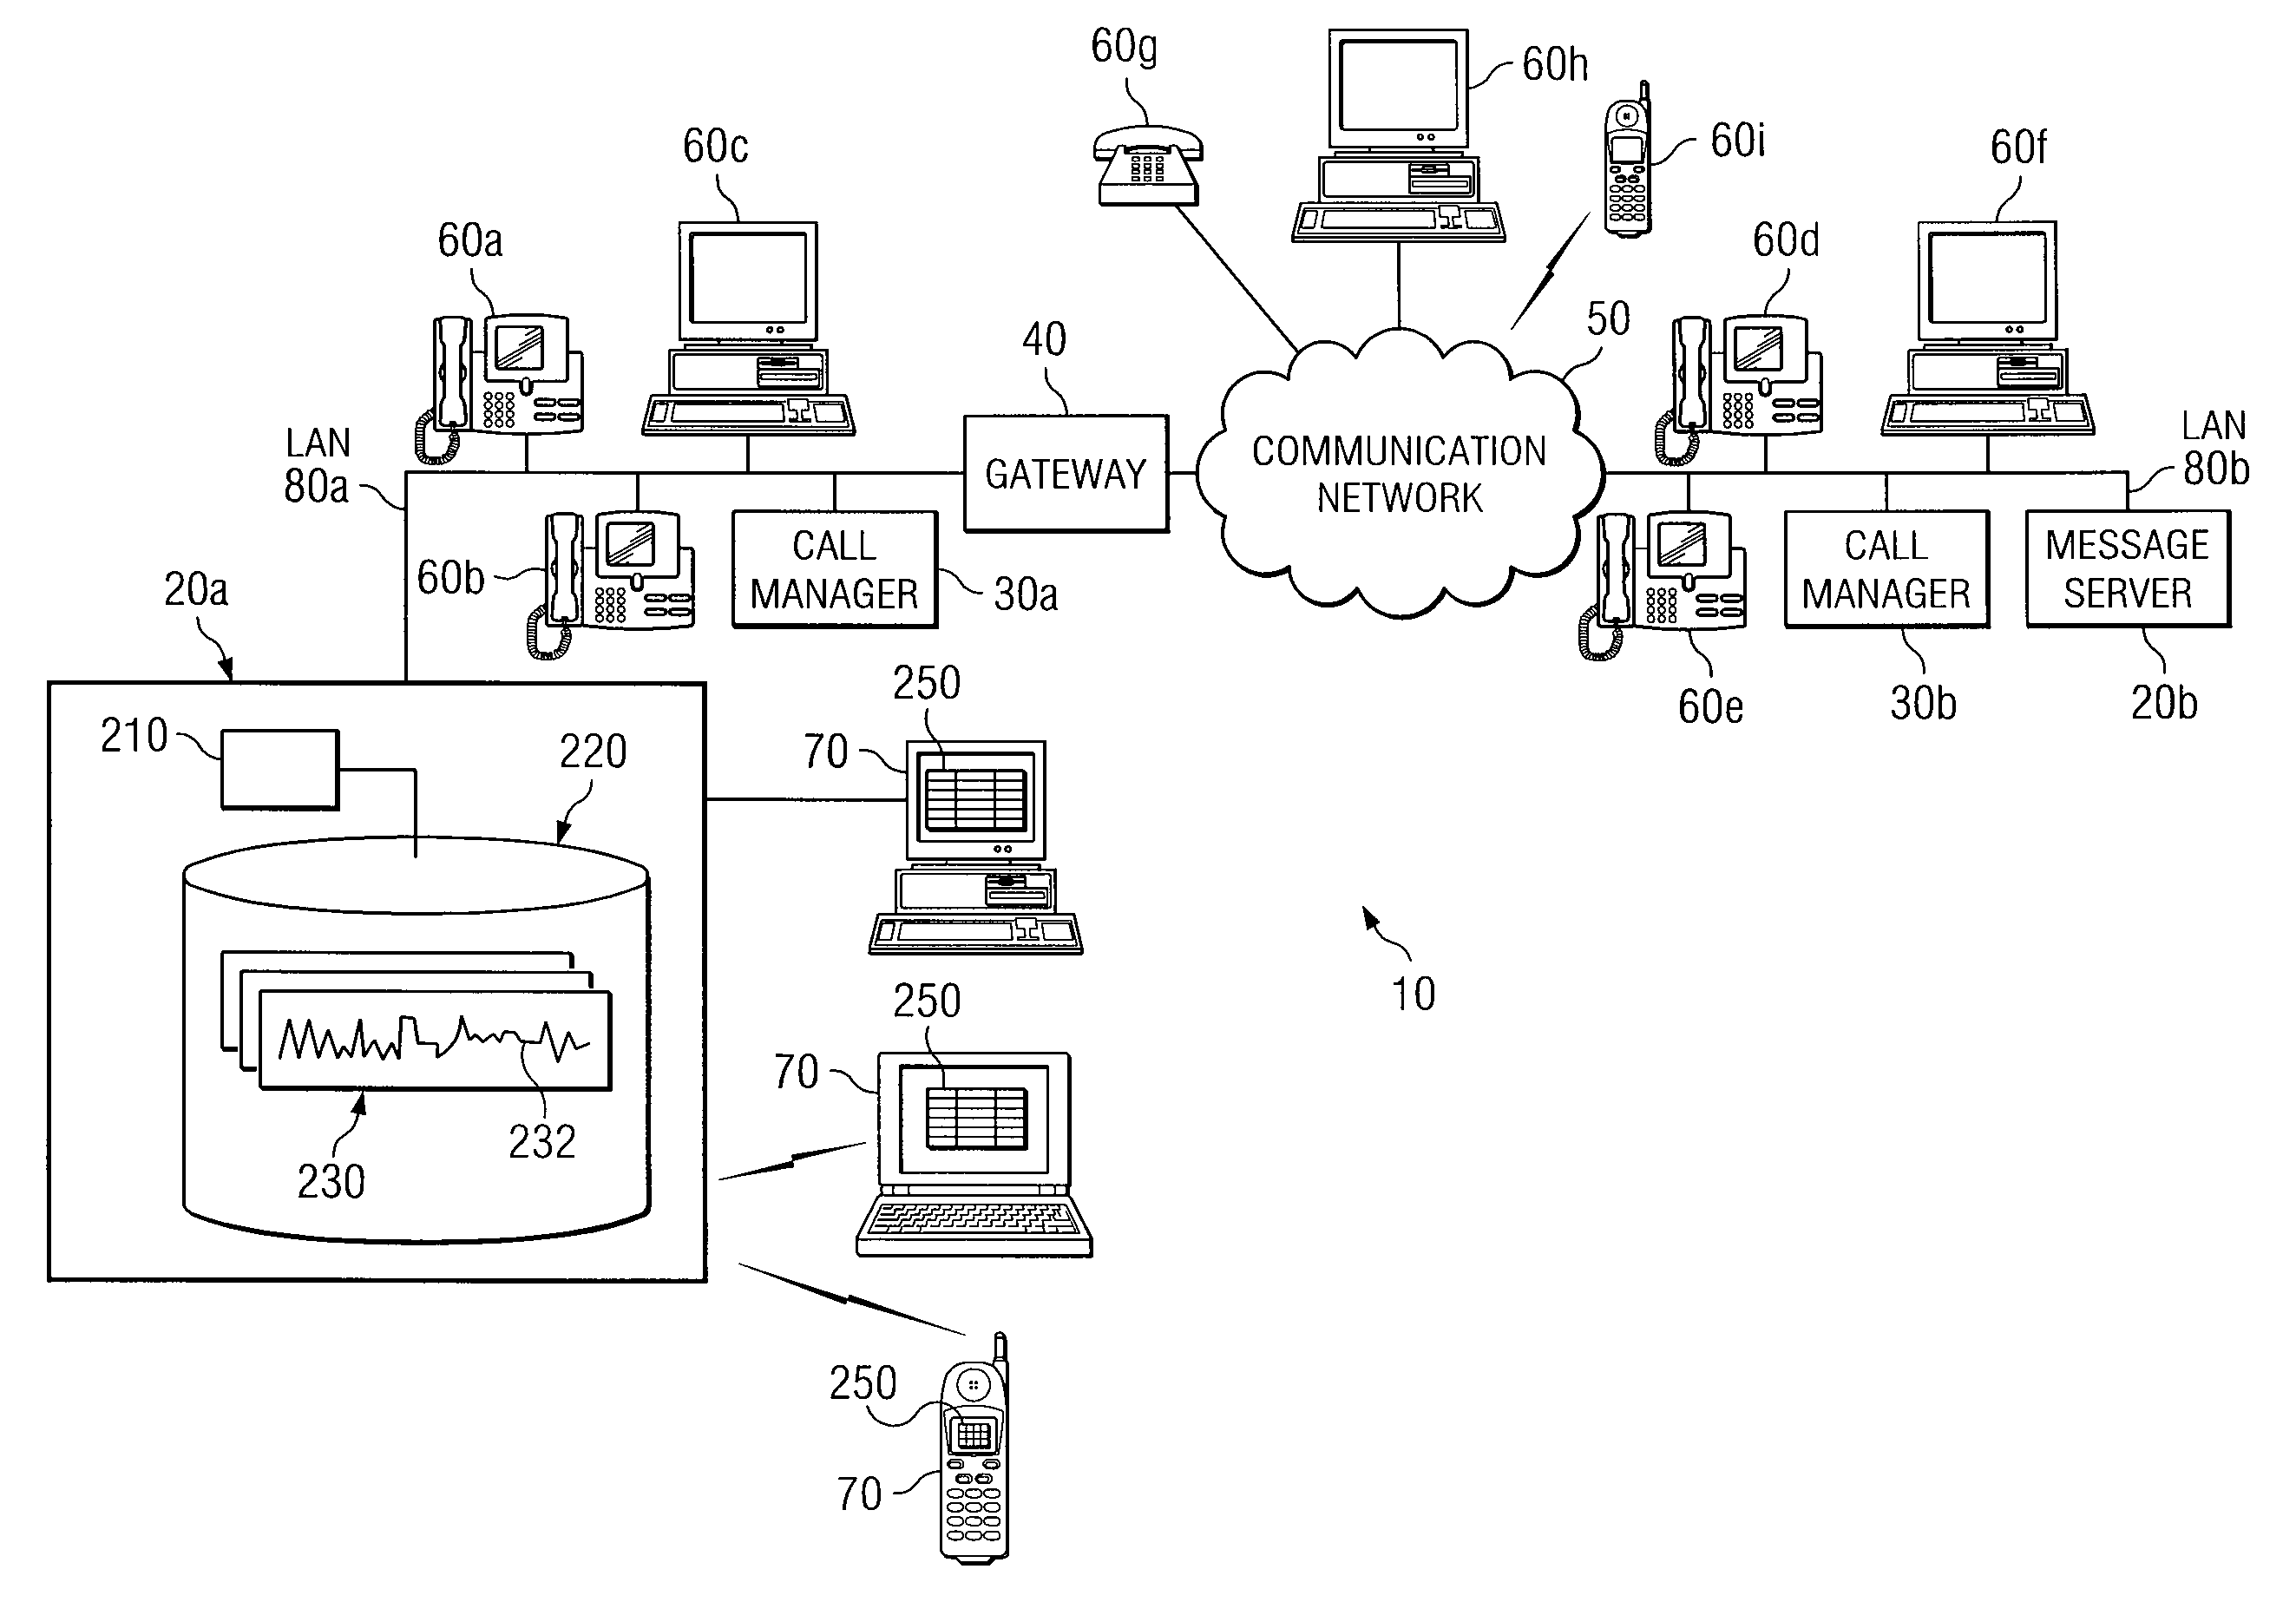 Method and System for Grouping Voice Messages